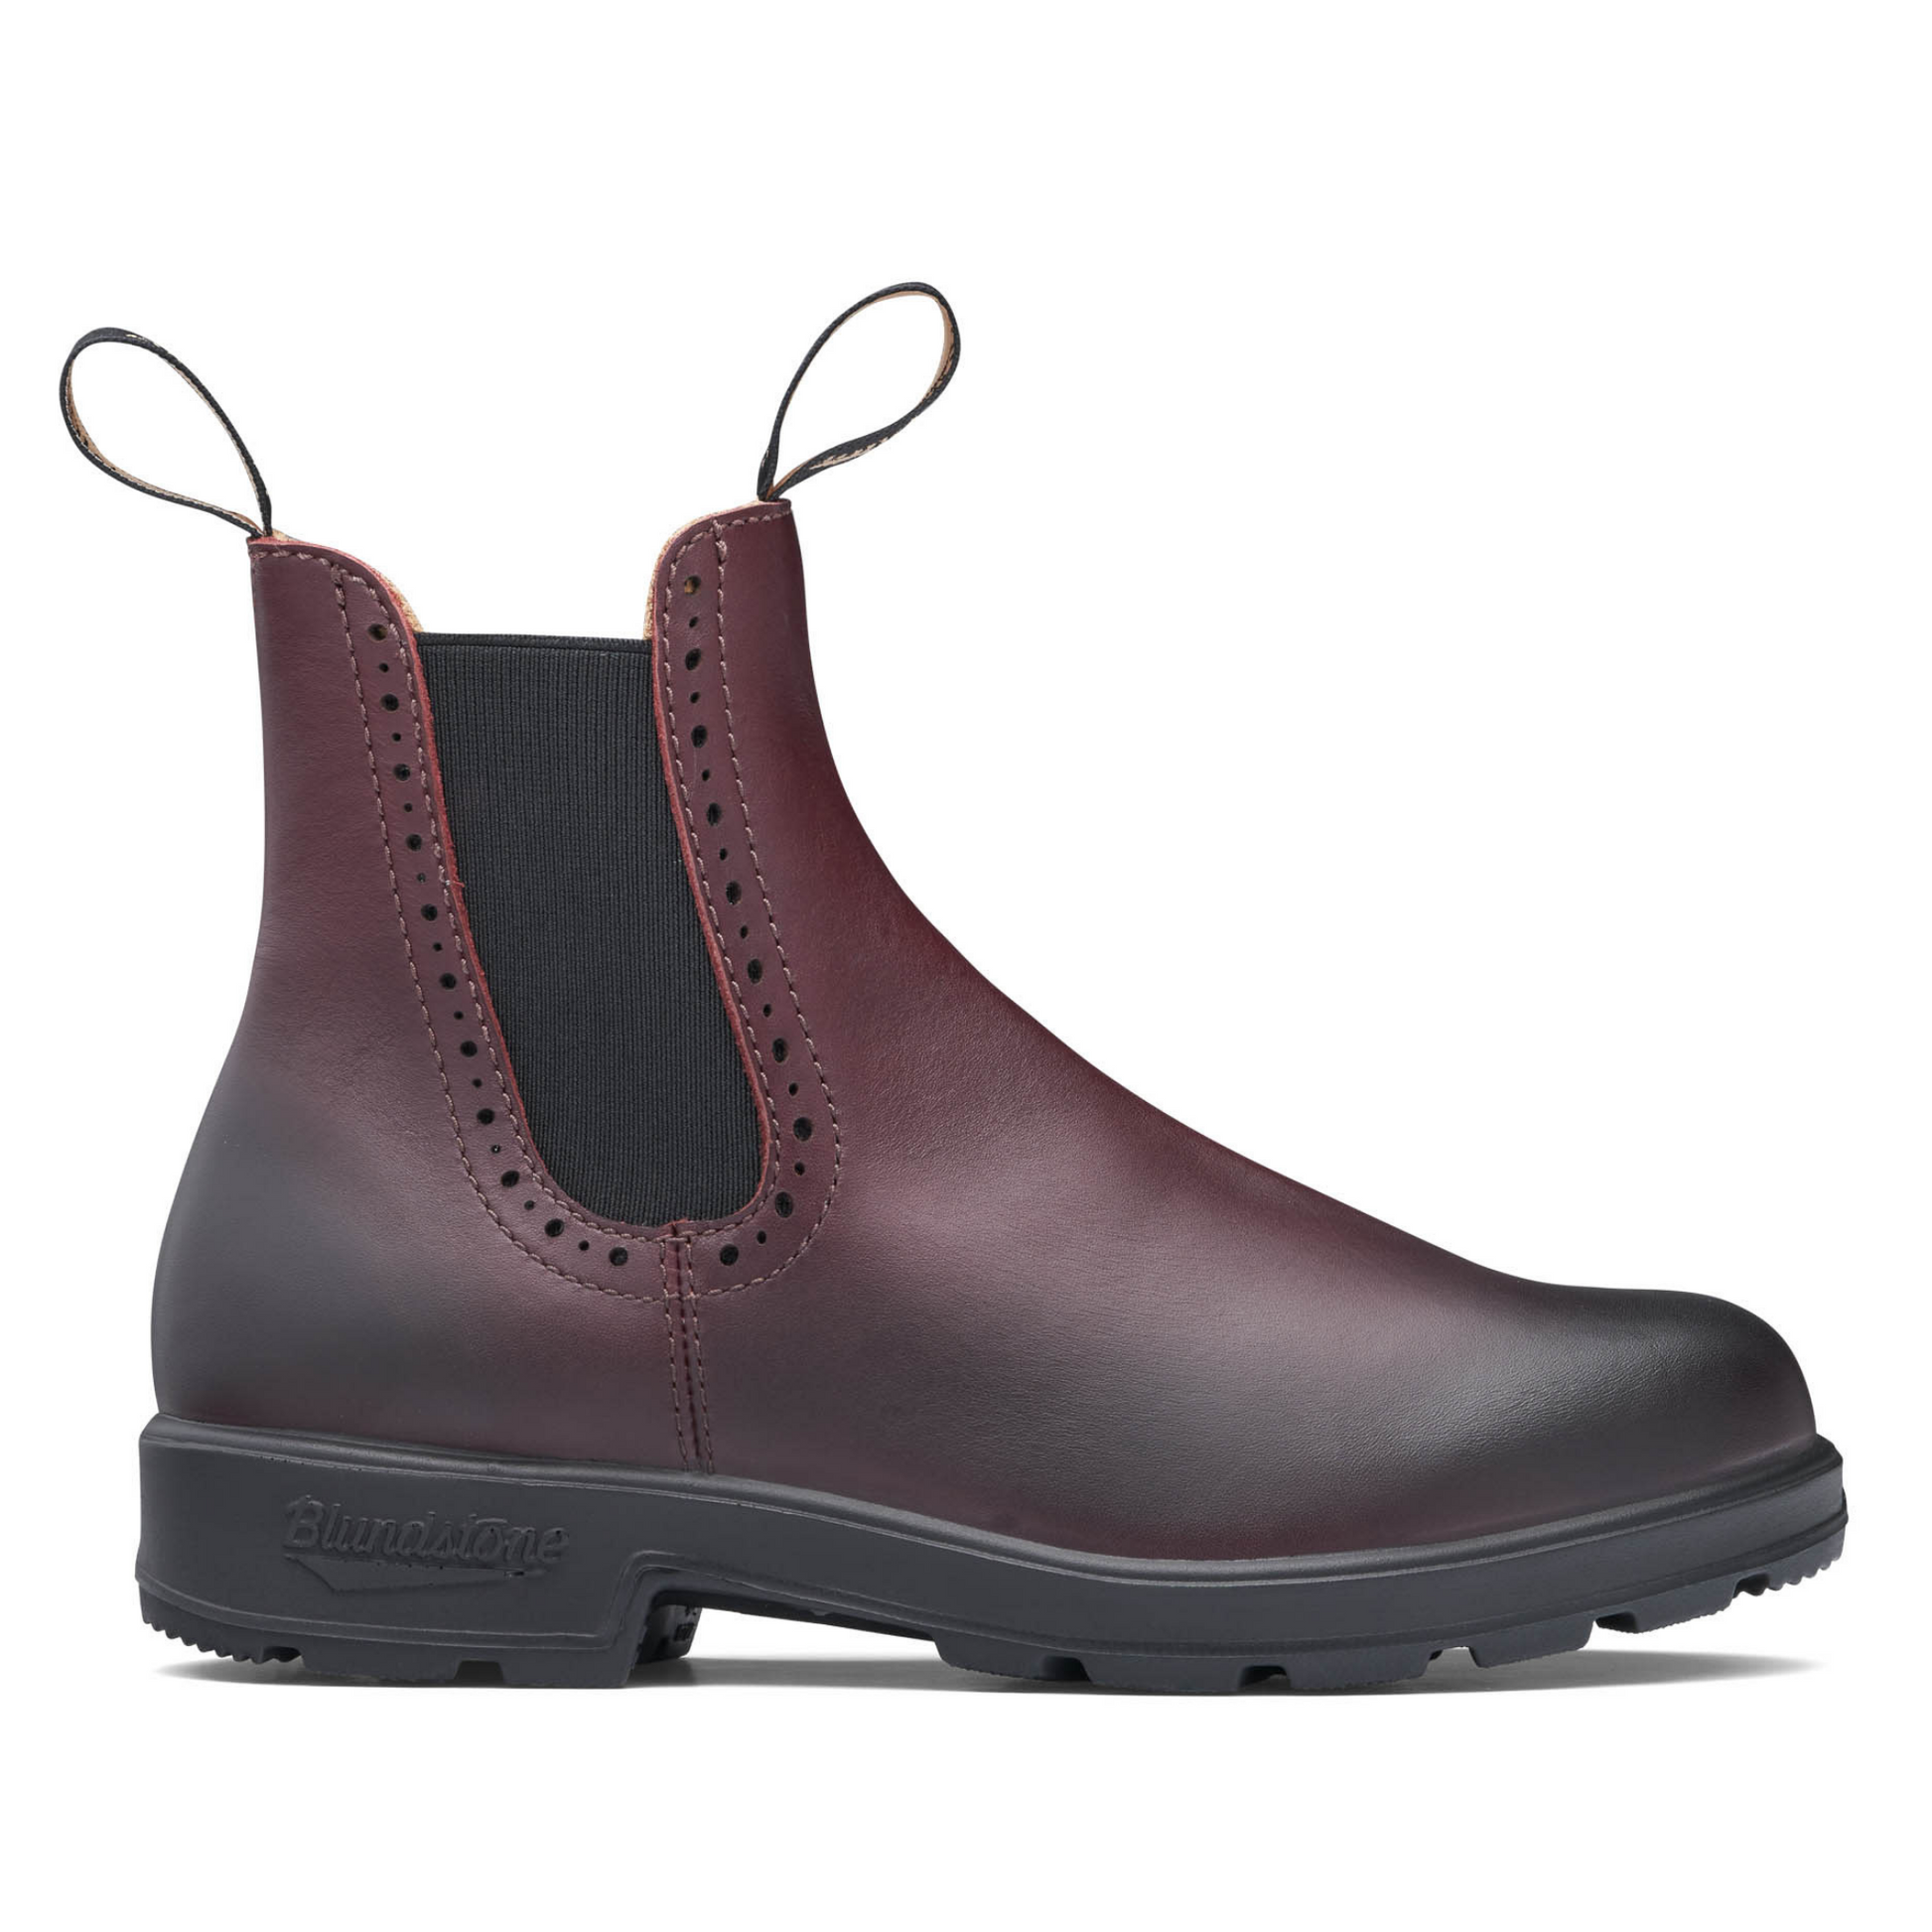 A side profile view of the right boot. Shiraz coloured leather boot with black sole and low heel. 